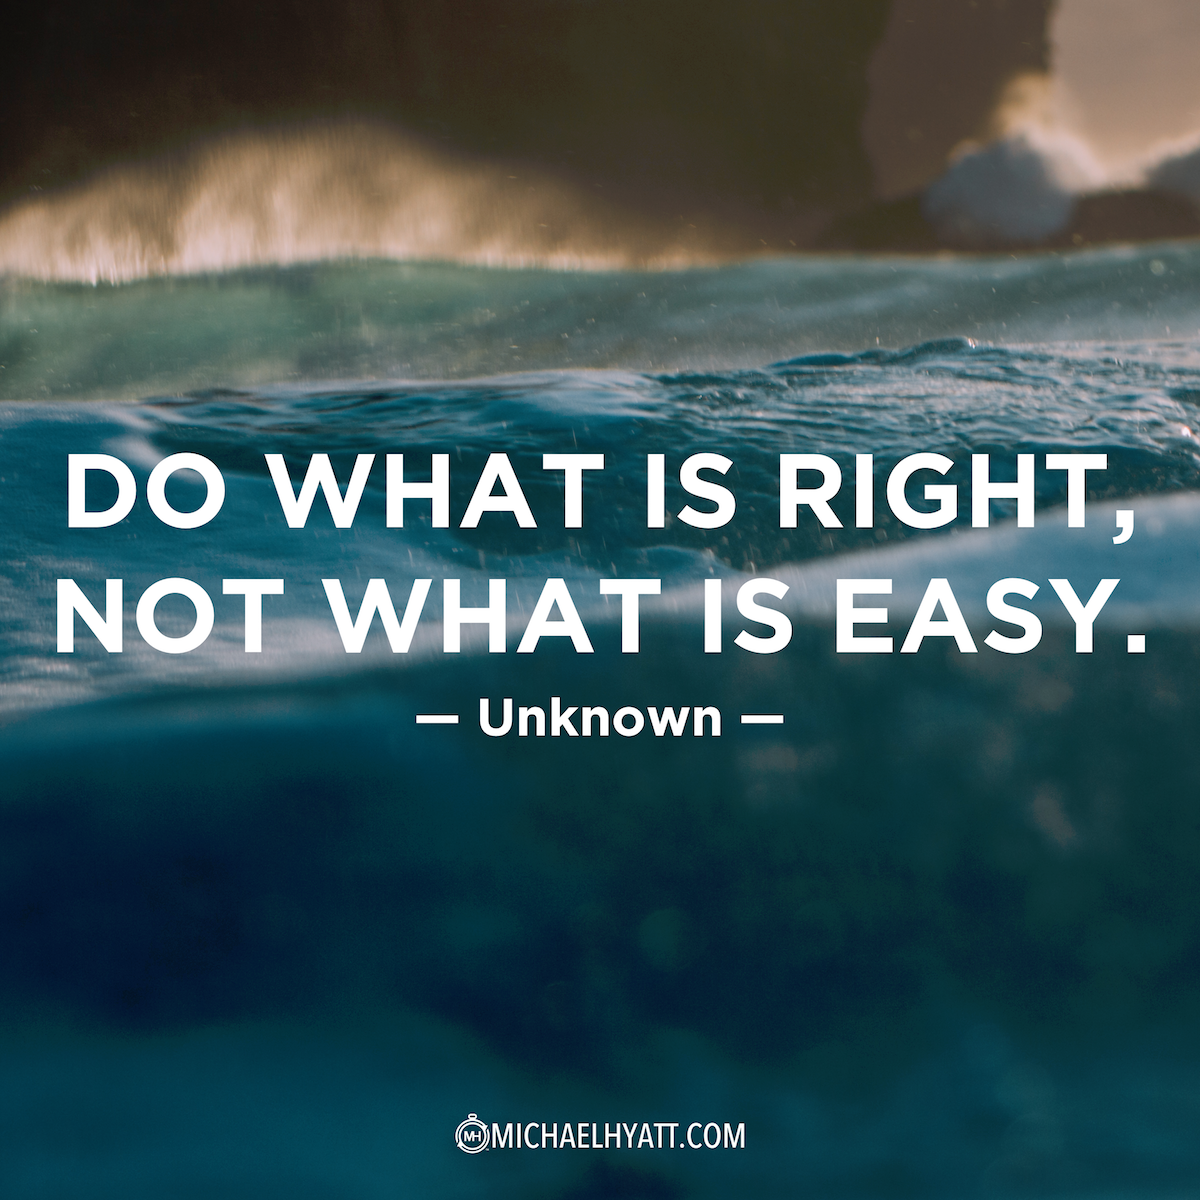 Do What Is Right Not What Is Easy Quotes - HD Wallpaper 